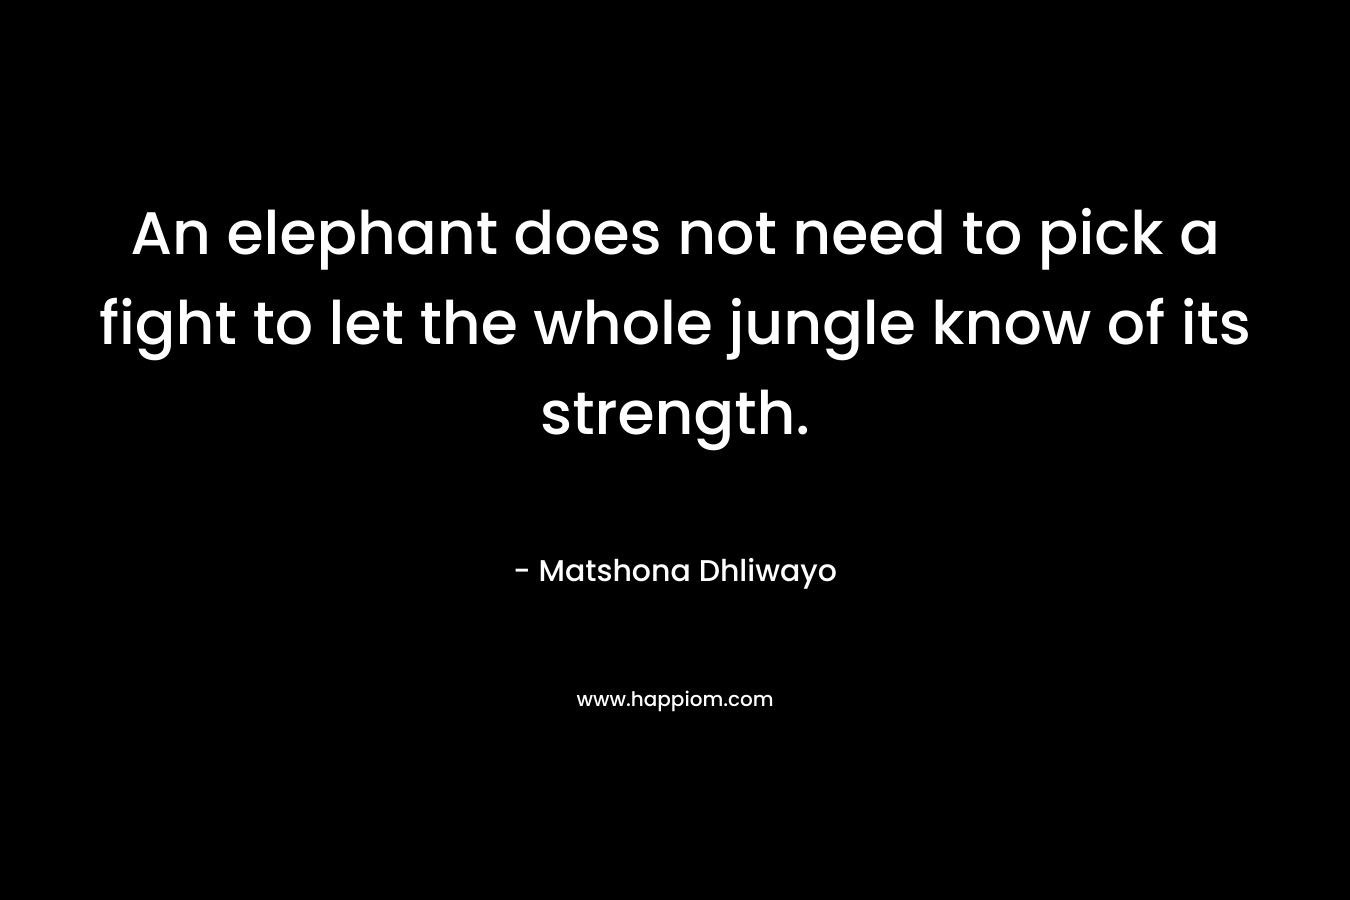 An elephant does not need to pick a fight to let the whole jungle know of its strength. – Matshona Dhliwayo